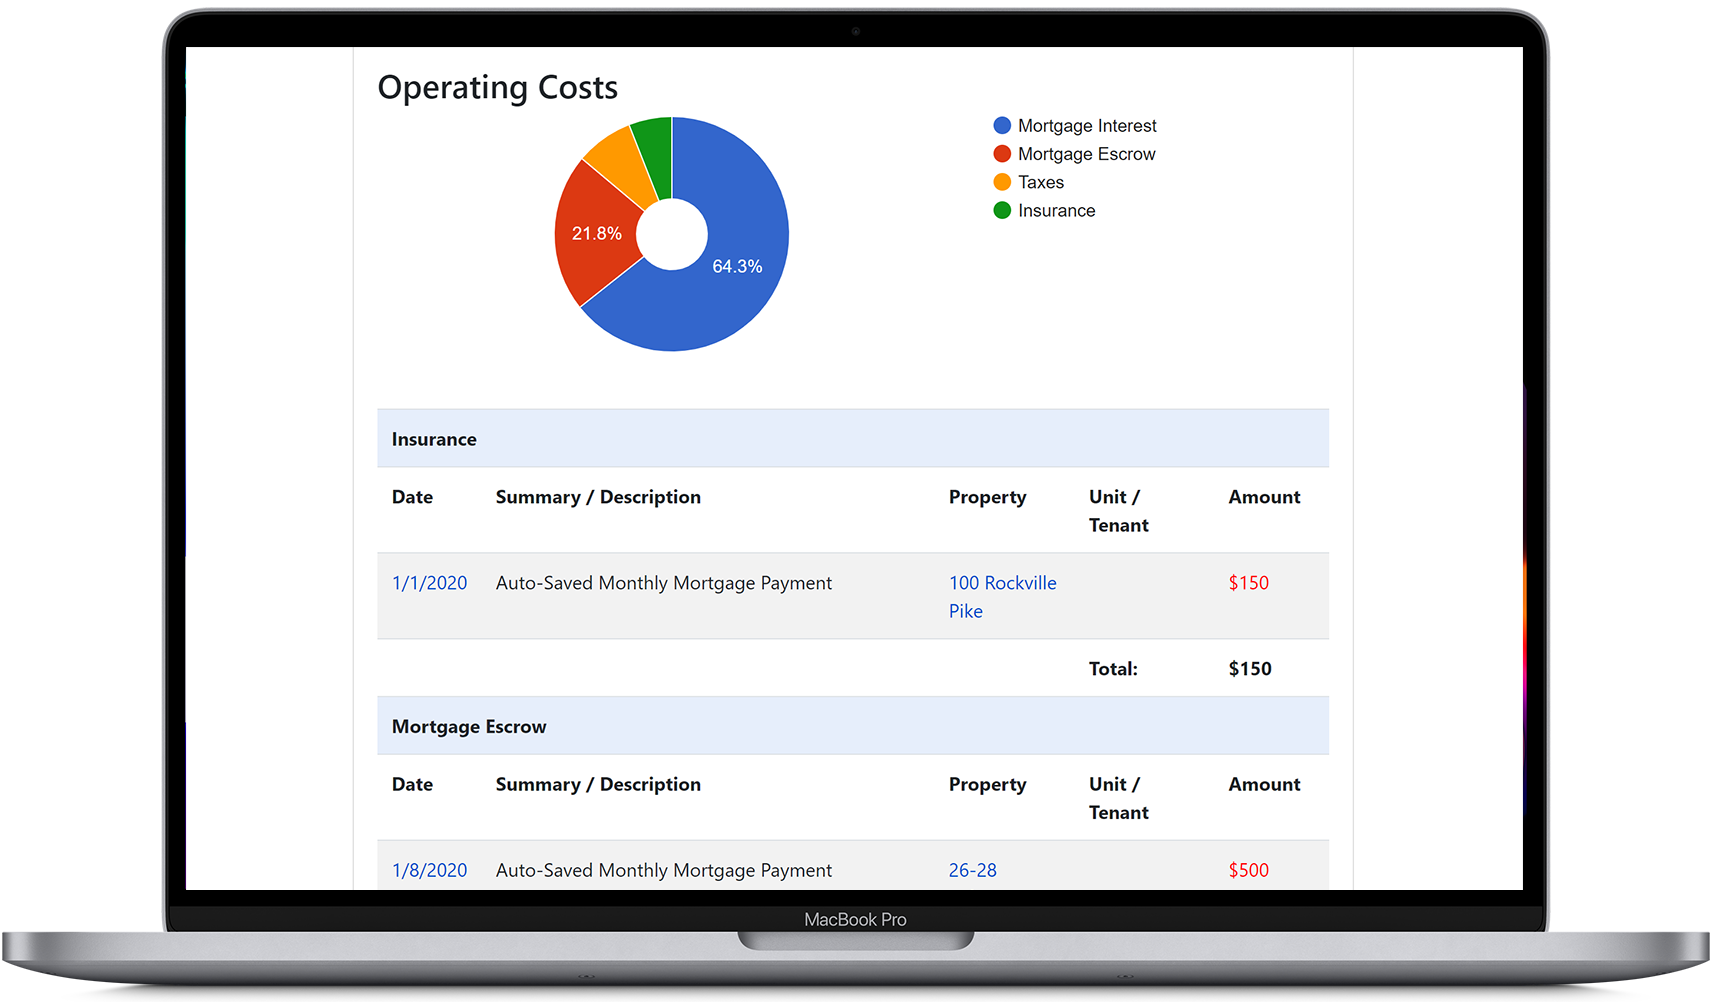 View the operating costs report in our landlord software, showing rental expenses